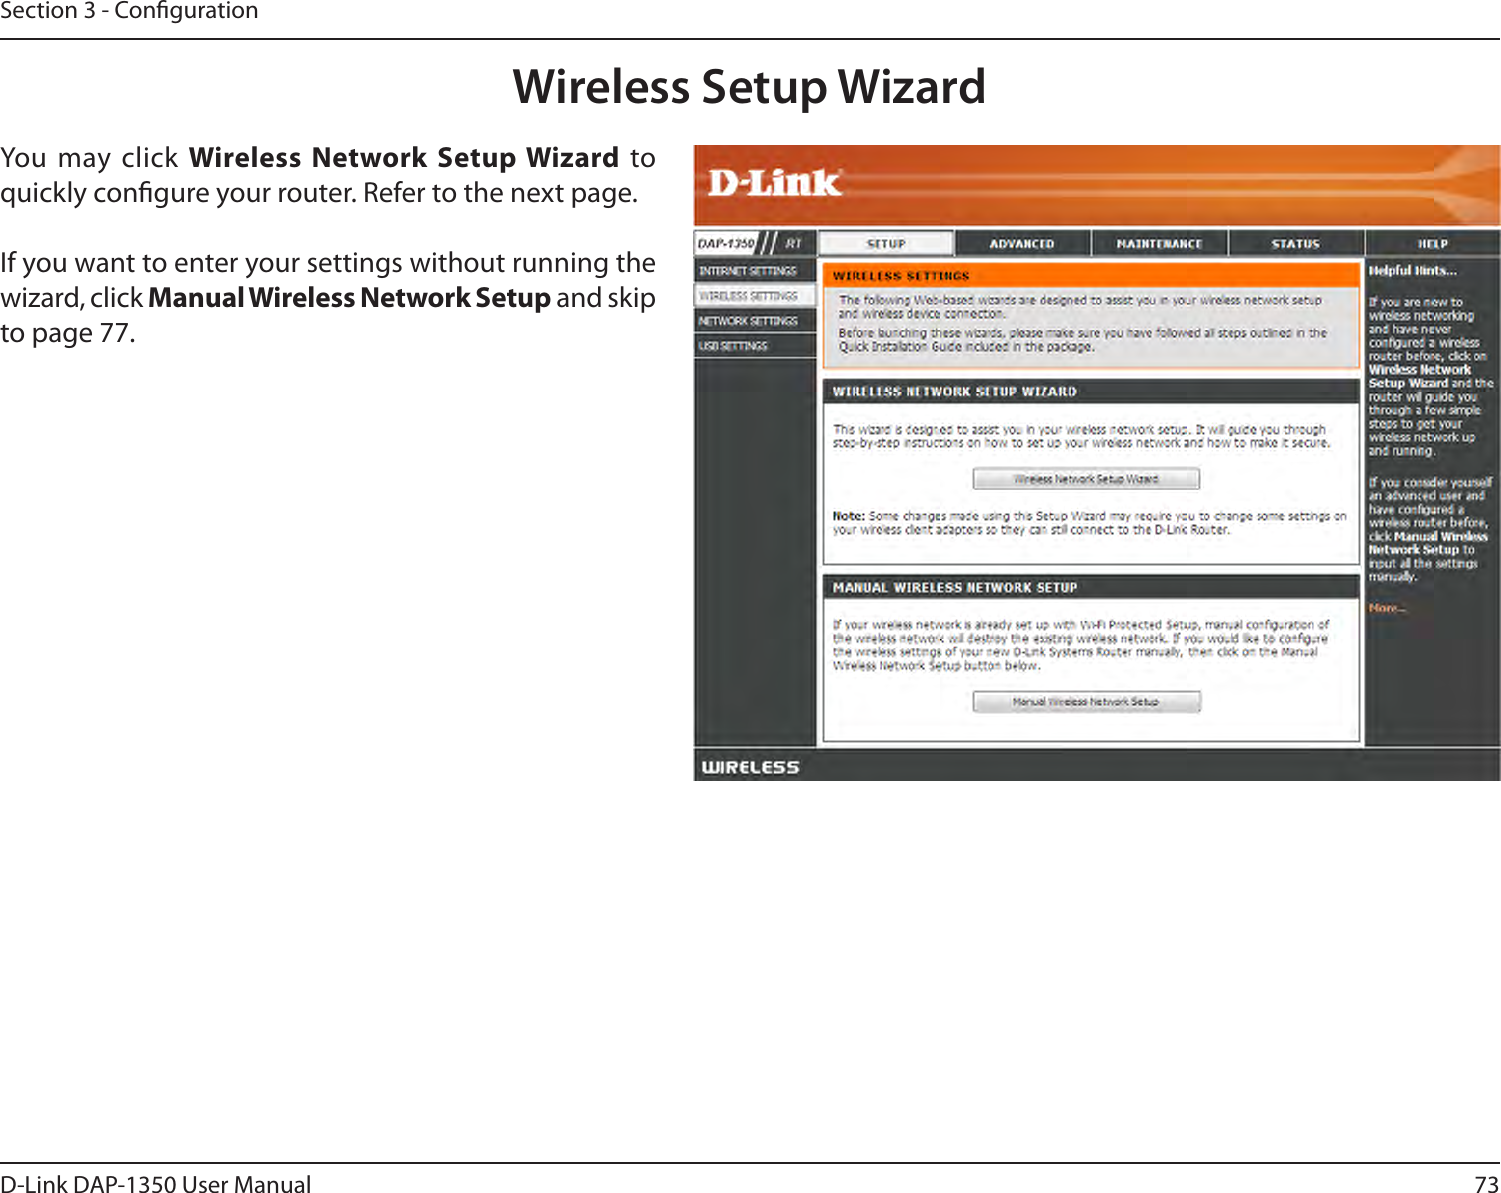 73D-Link DAP-1350 User ManualSection 3 - CongurationWireless Setup WizardYou may click Wireless Network Setup Wizard  to quickly congure your router. Refer to the next page.If you want to enter your settings without running the wizard, click Manual Wireless Network Setup and skip to page 77.